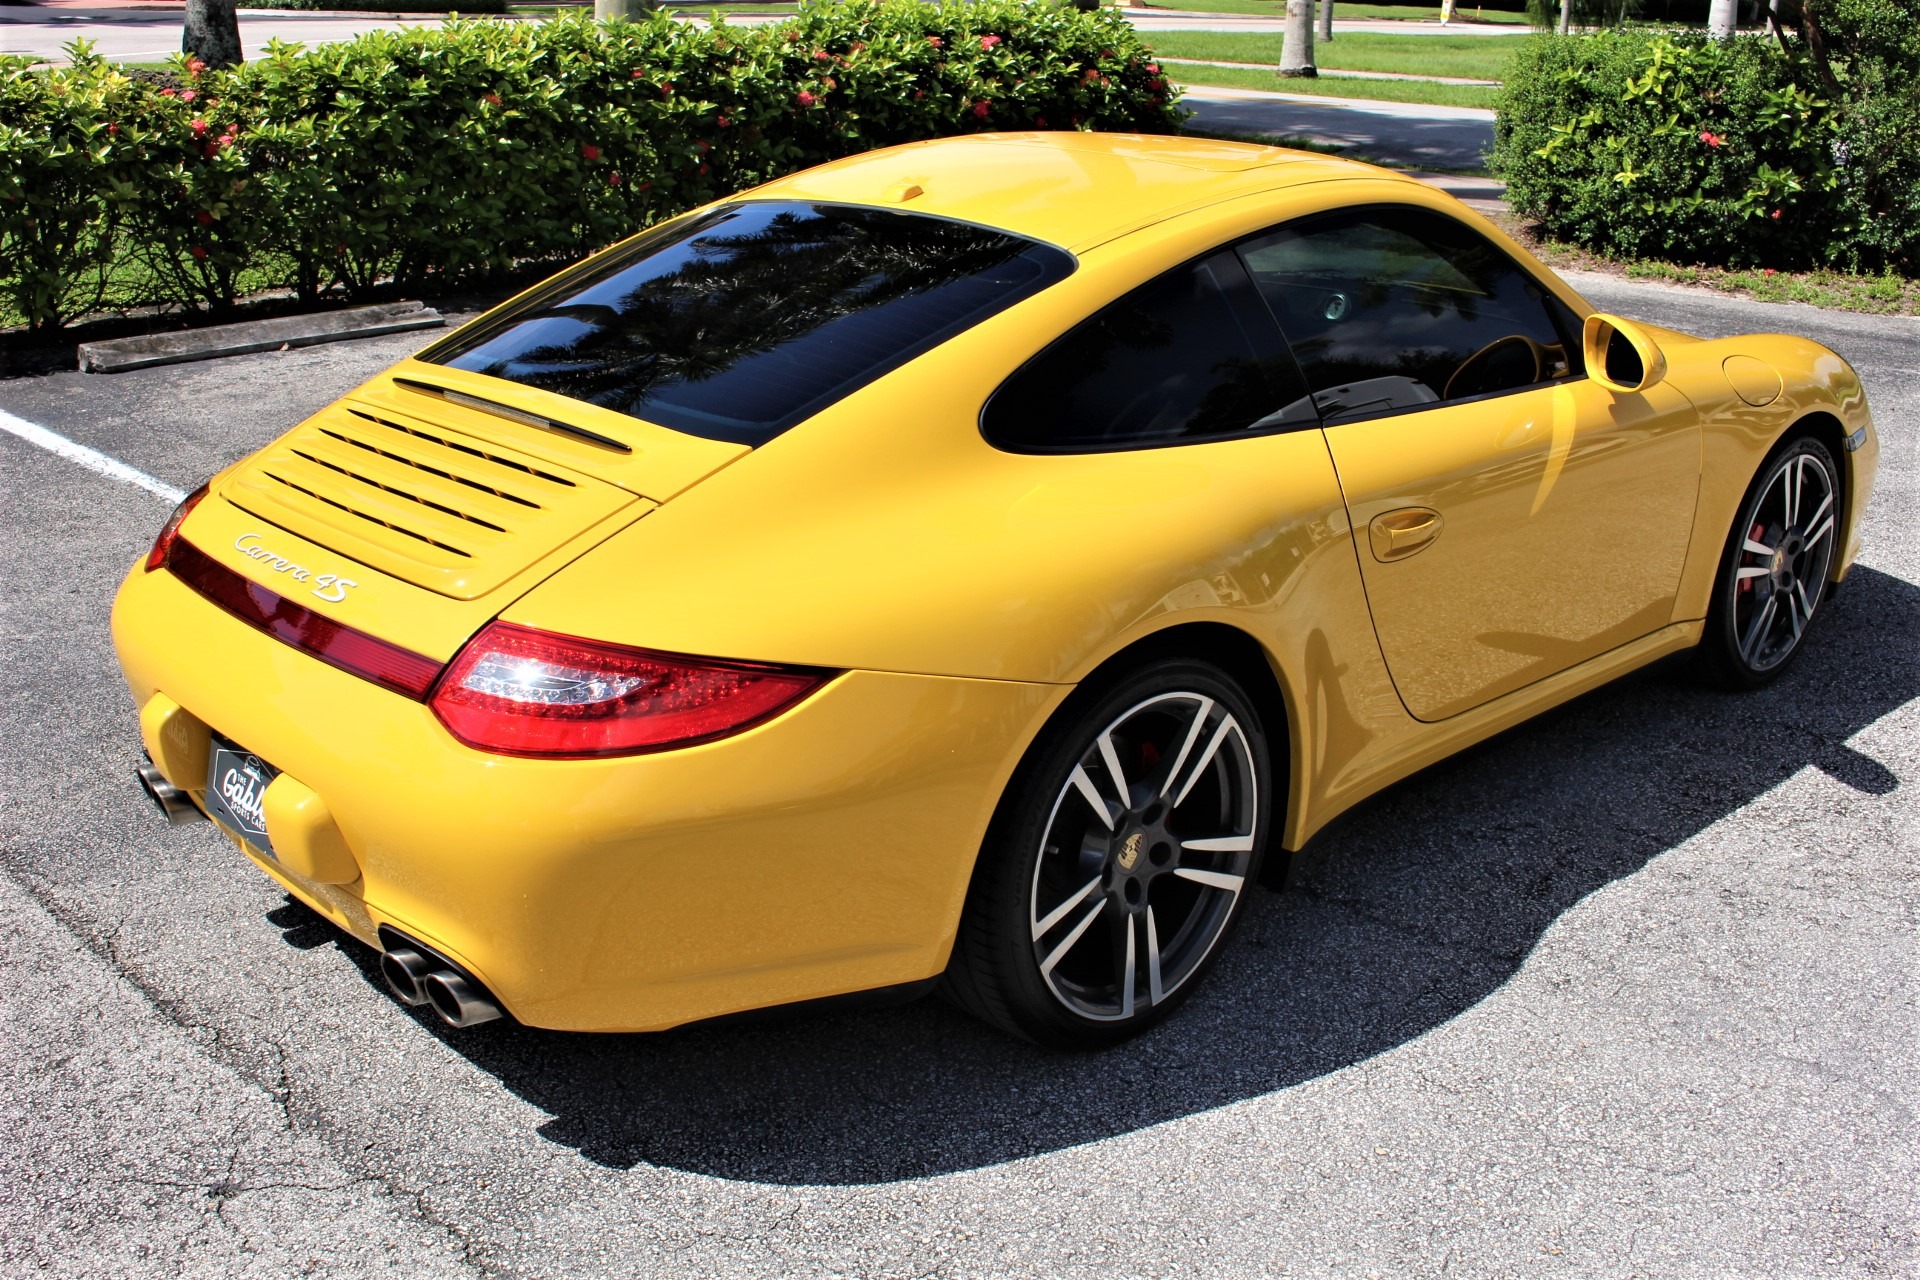 Used 2011 Porsche 911 Carrera 4S for sale Sold at The Gables Sports Cars in Miami FL 33146 4